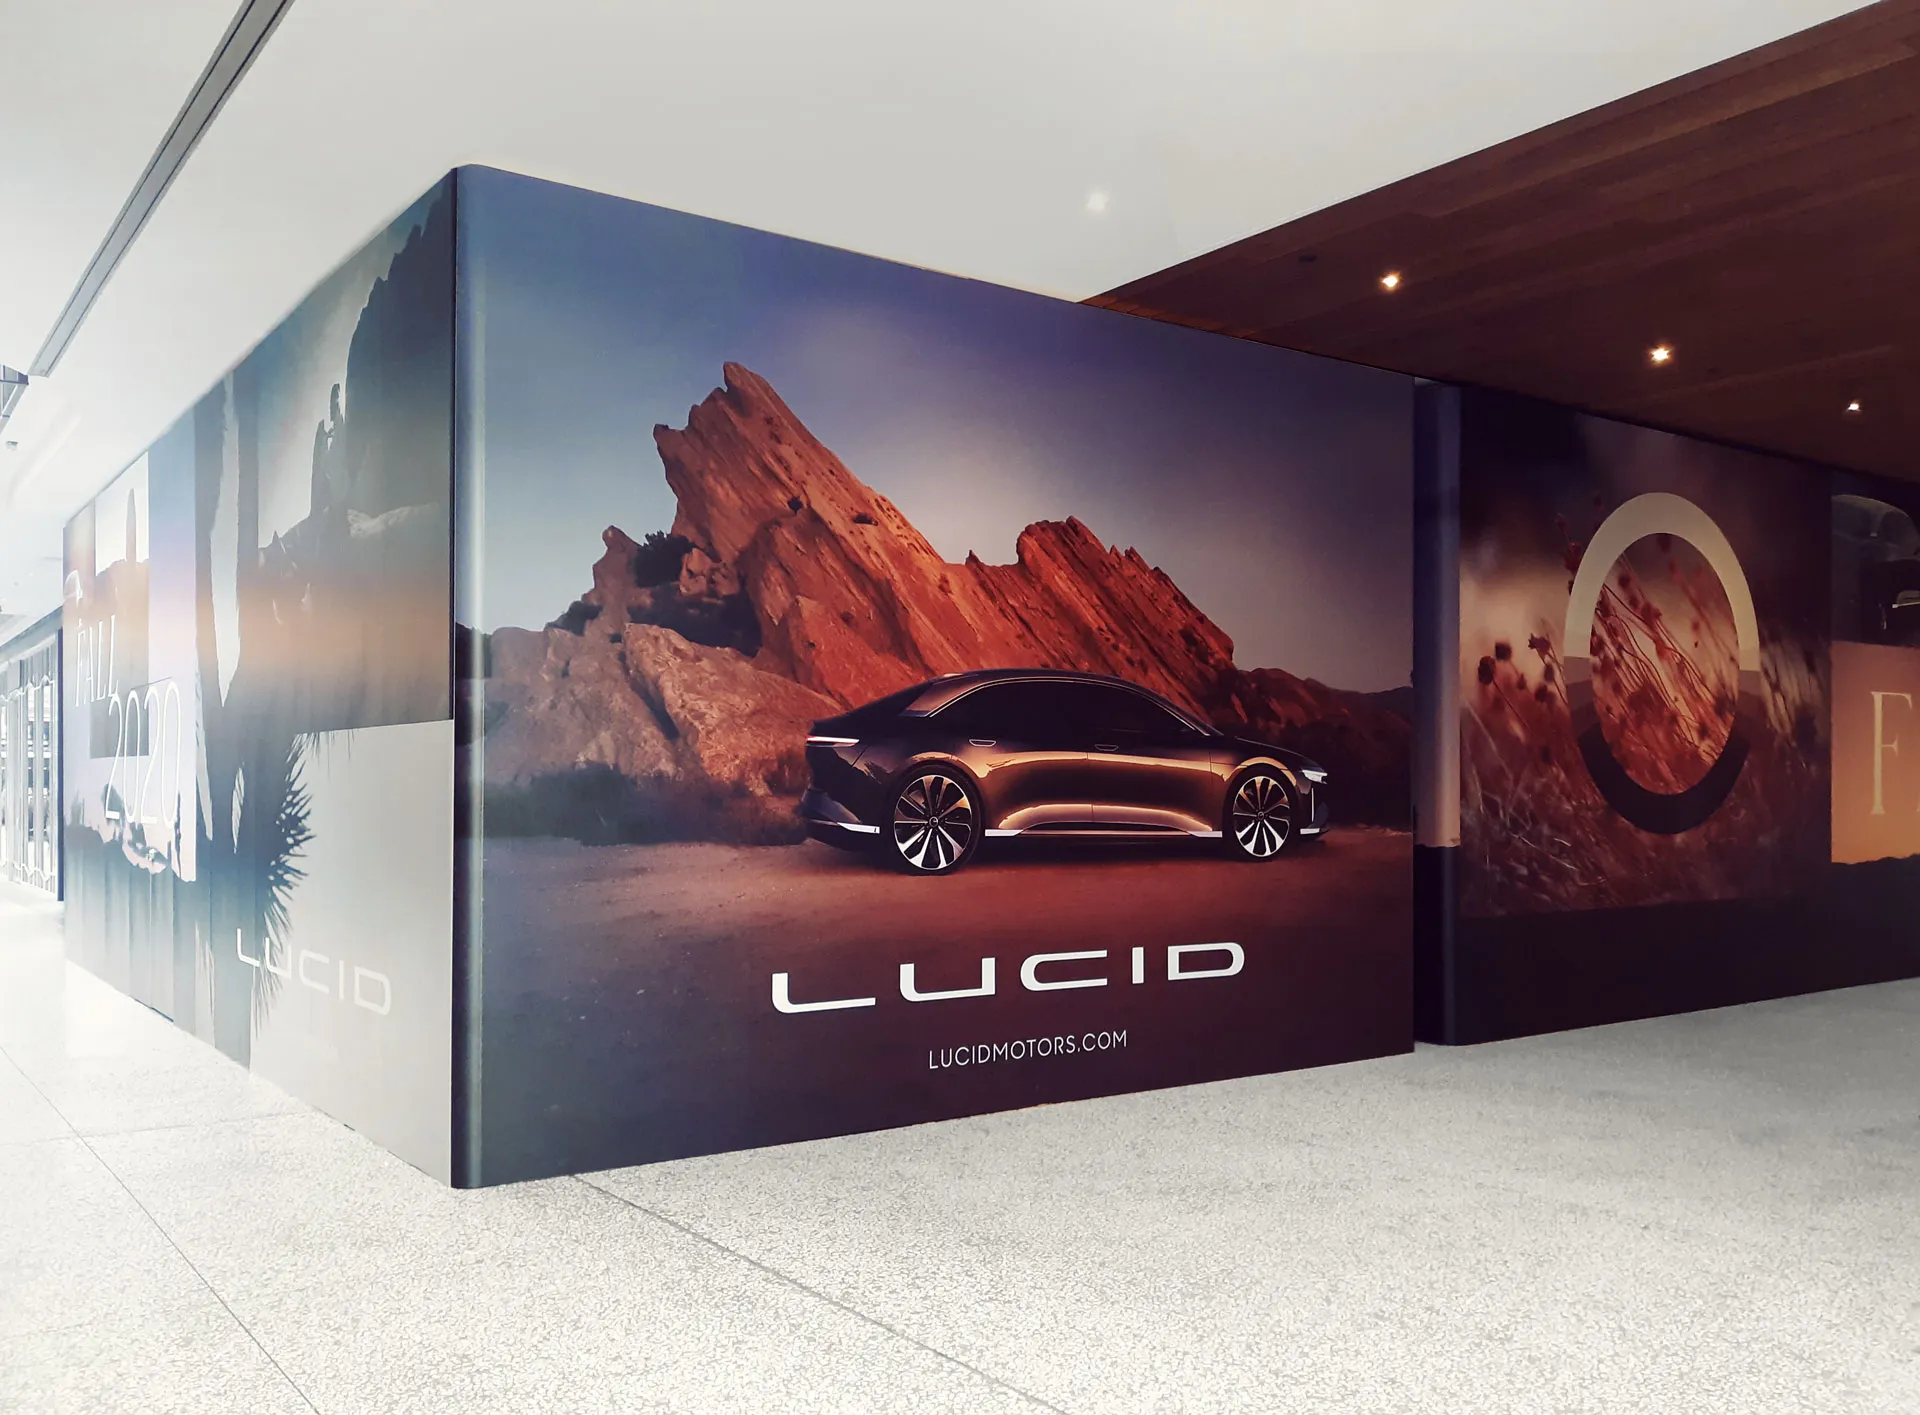 Lucid Studio Century City is currently under construction